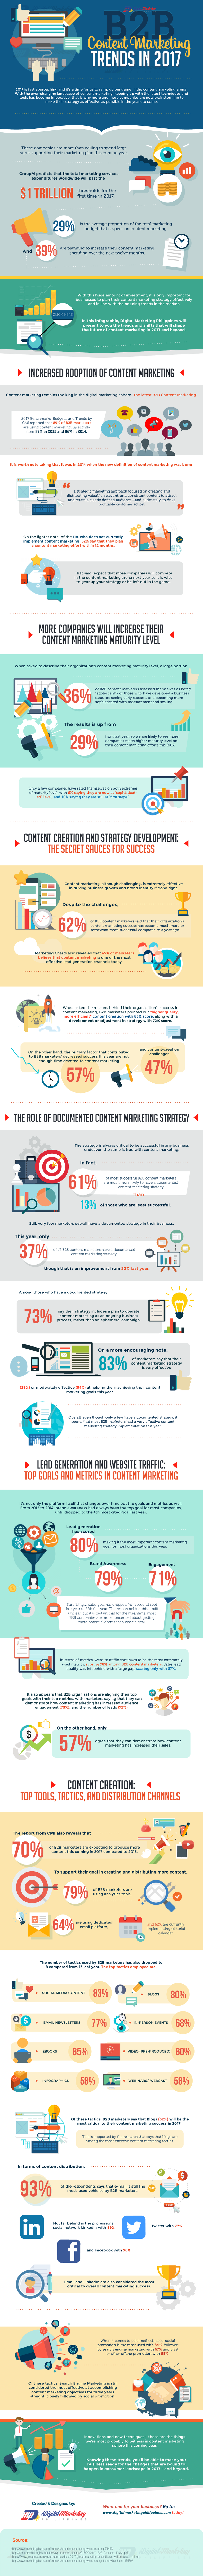 B2B-Content-Marketing-Trends-in-2017-HD.png